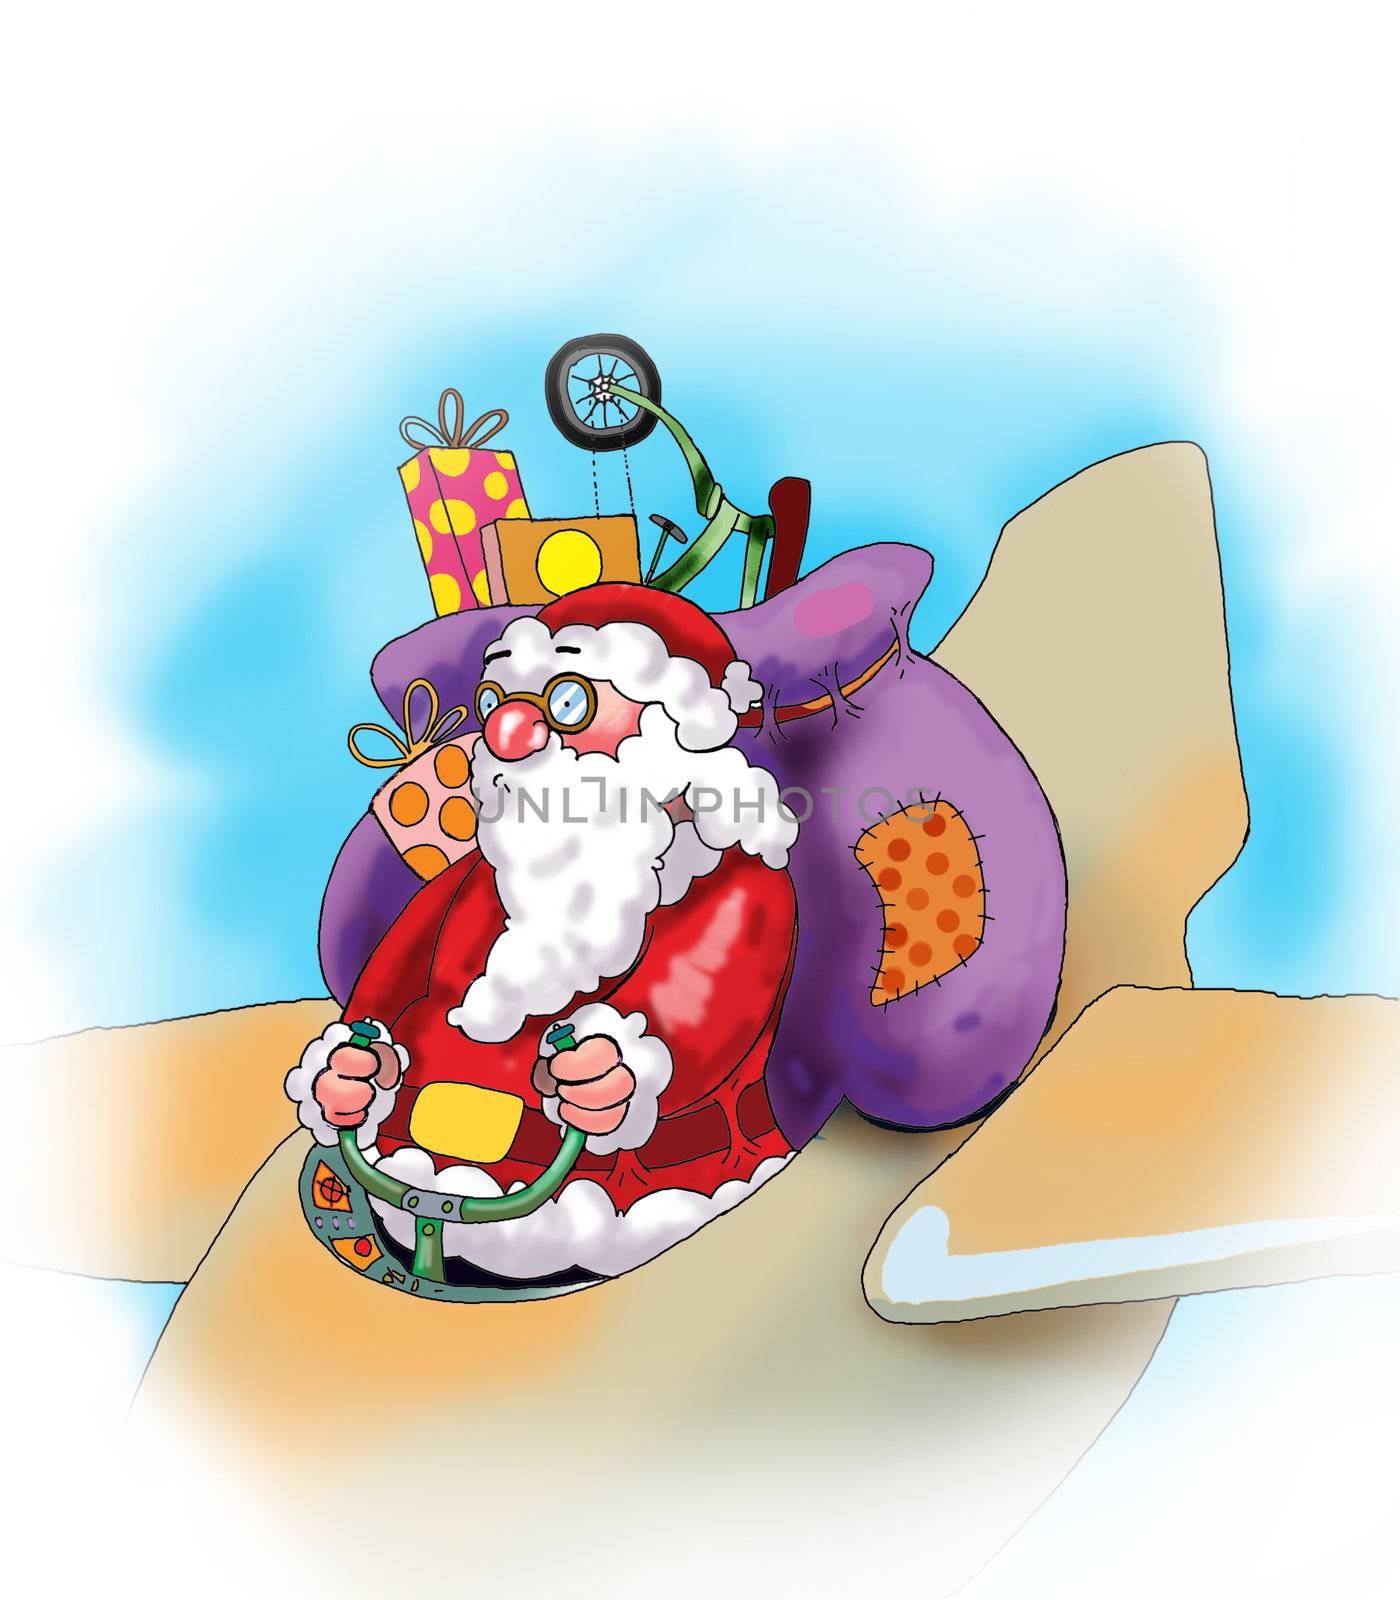 Santa Claus with his presents on the plane  by DOODNICK